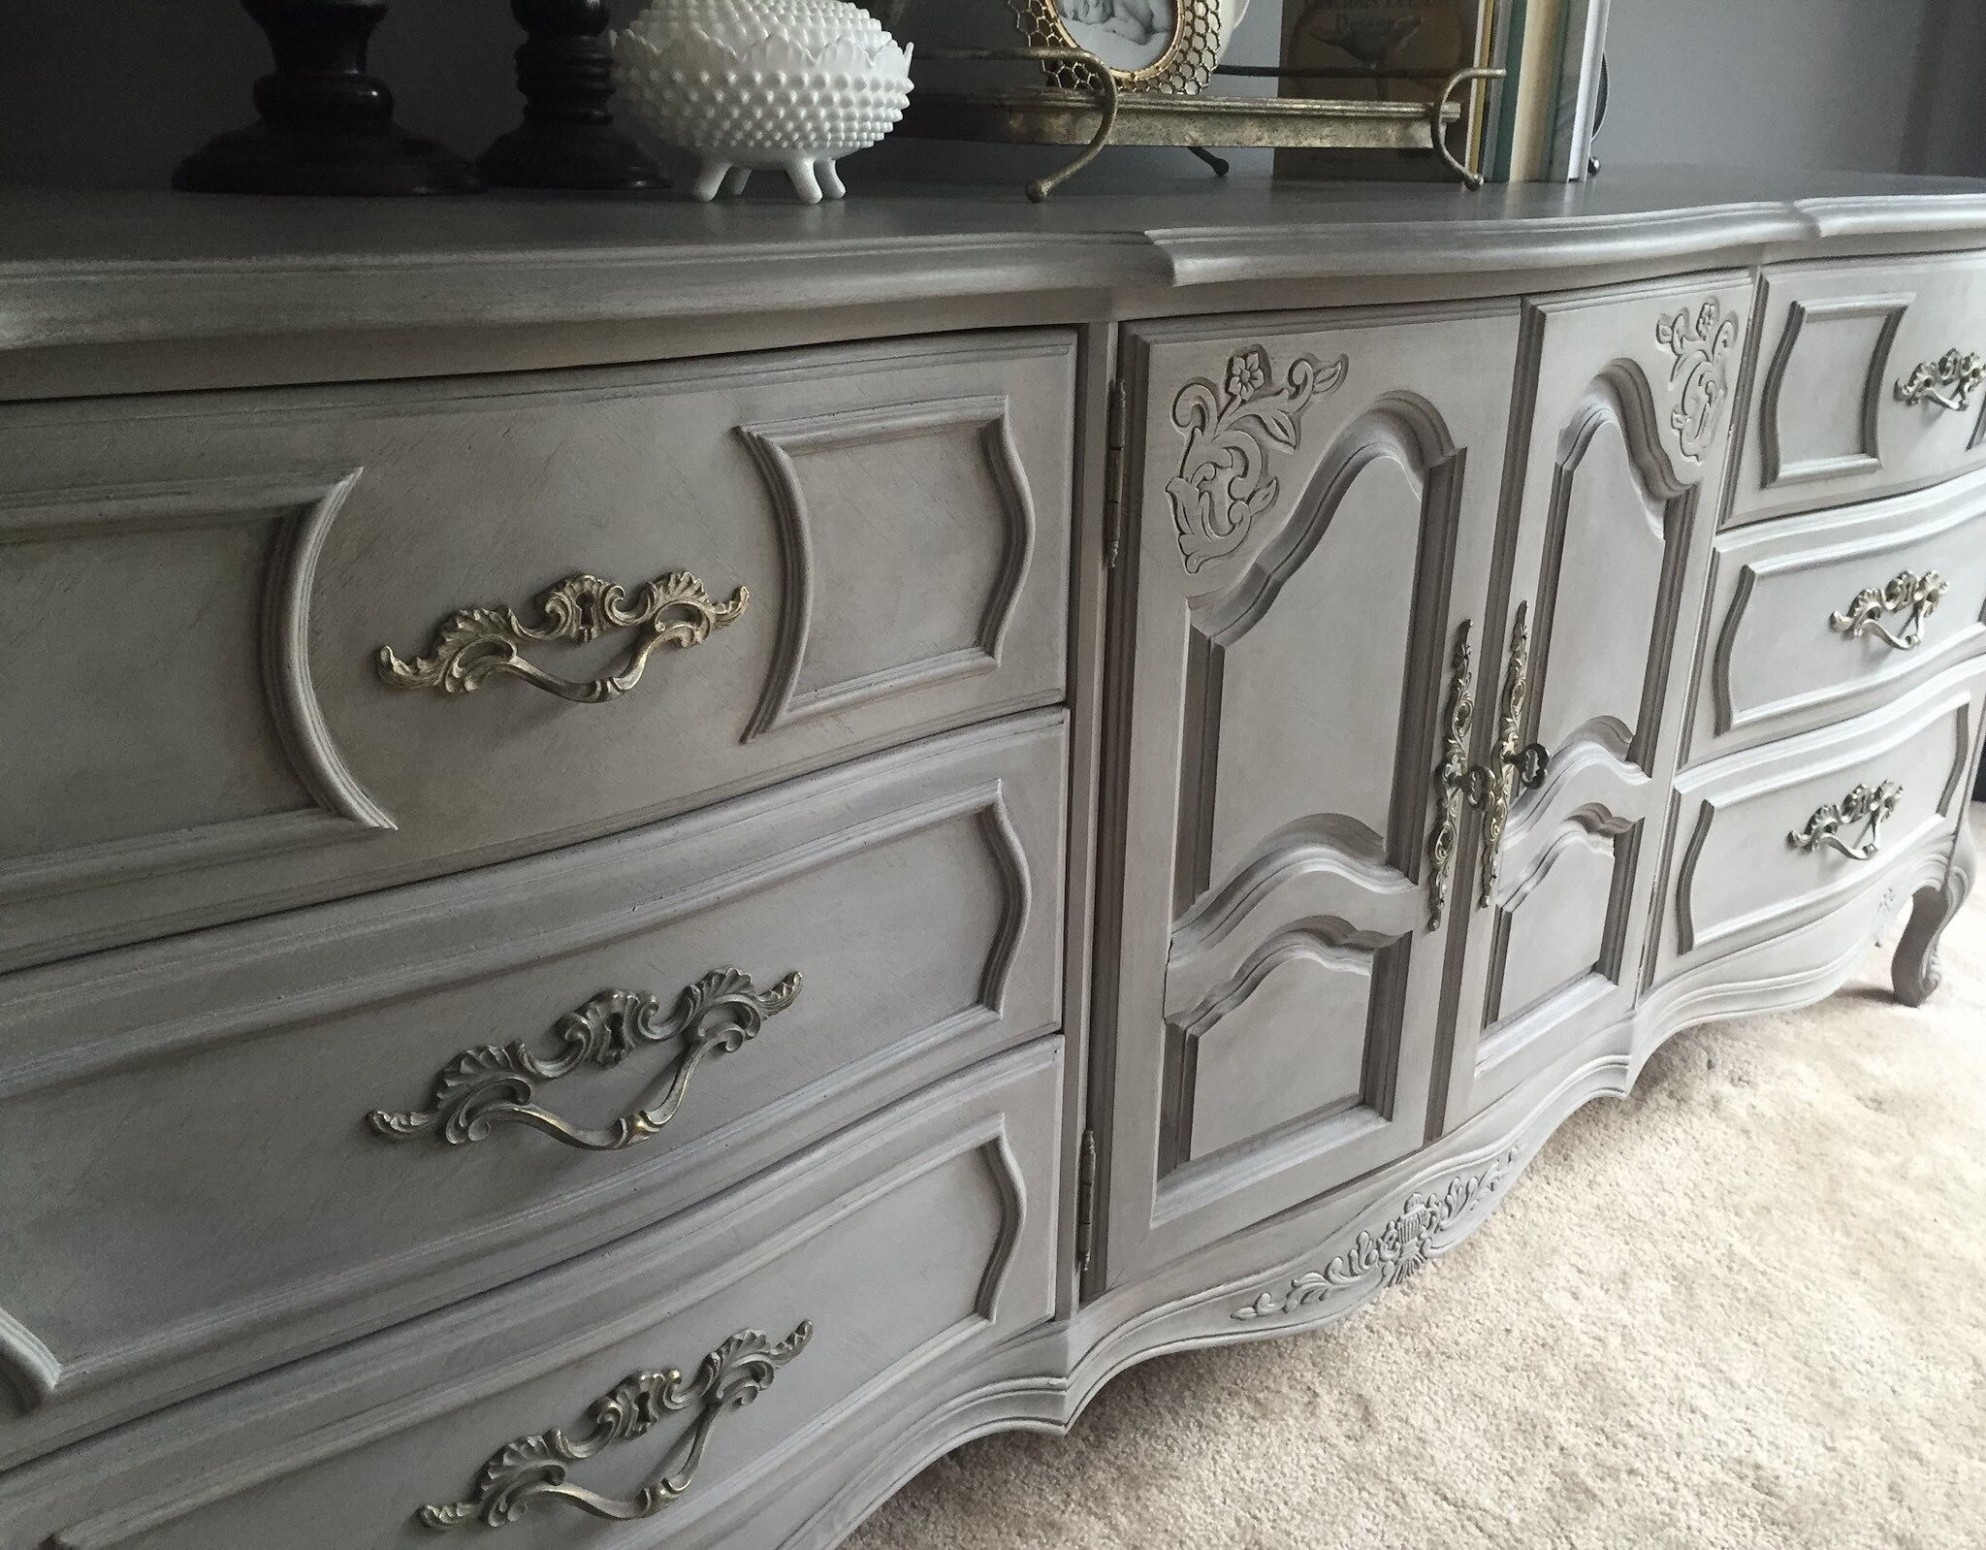 Stanley Dresser Redesigned In Annie Sloan Paris Gray With A Custom Colored Wax And Old Violet Drawers. #anniesloan #p